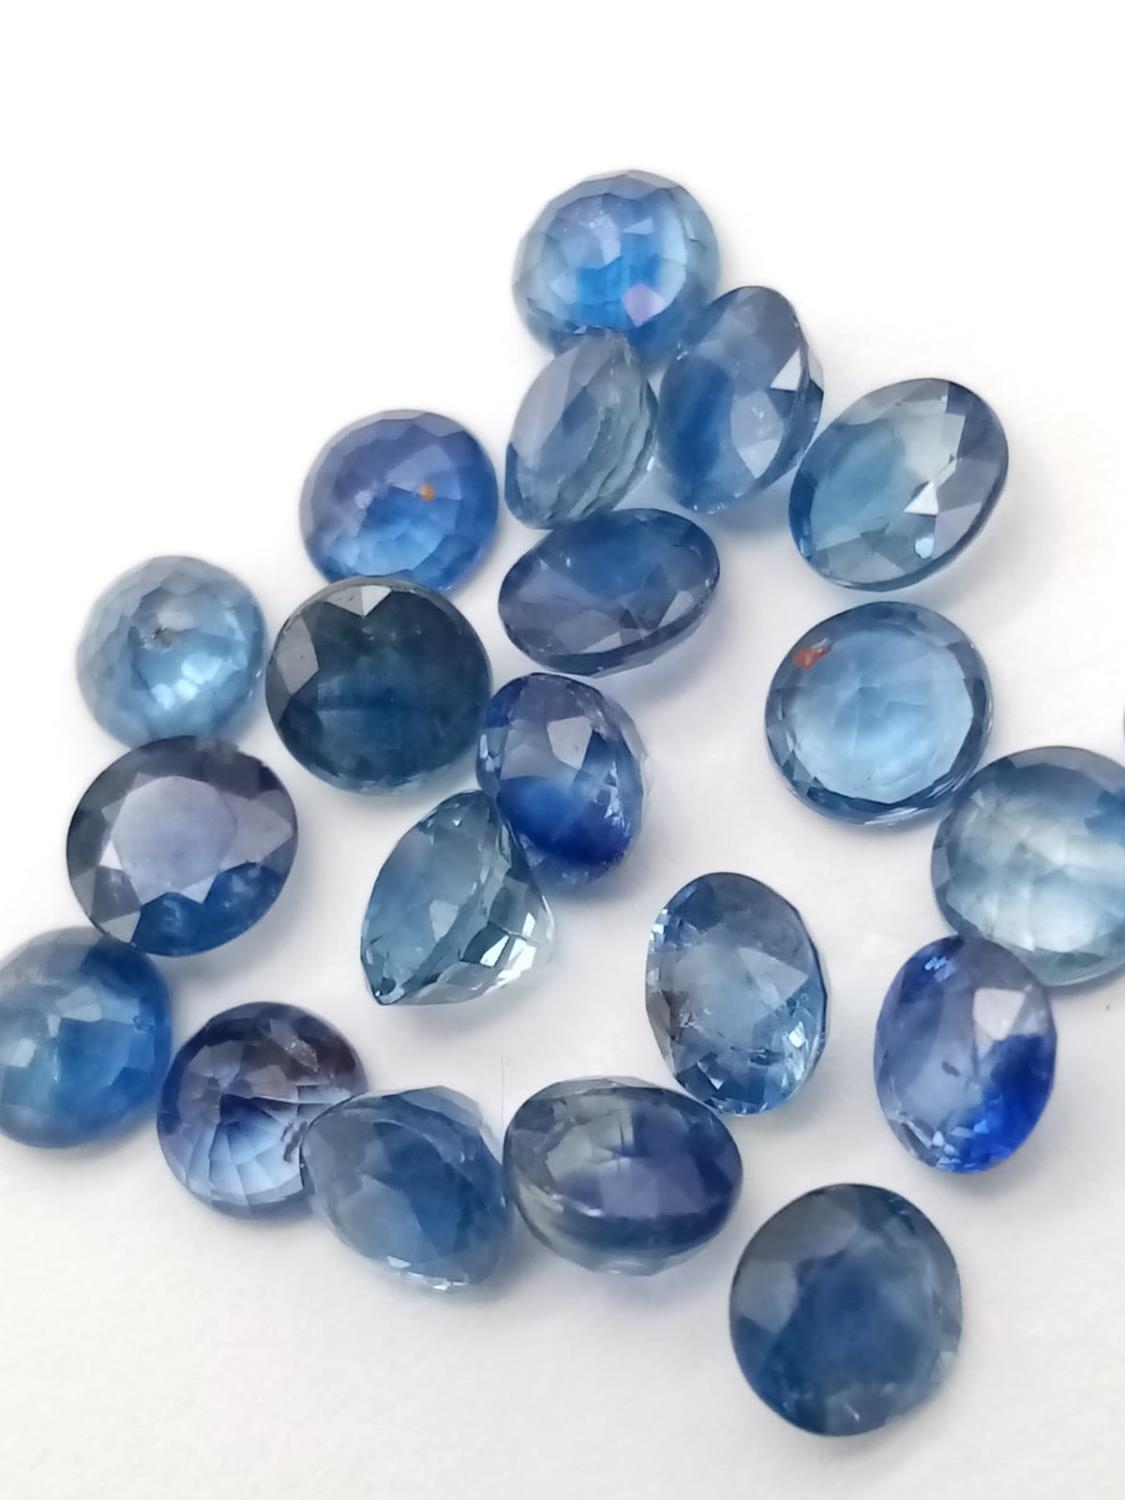 4.90ct loose blue sapphires - Image 3 of 3